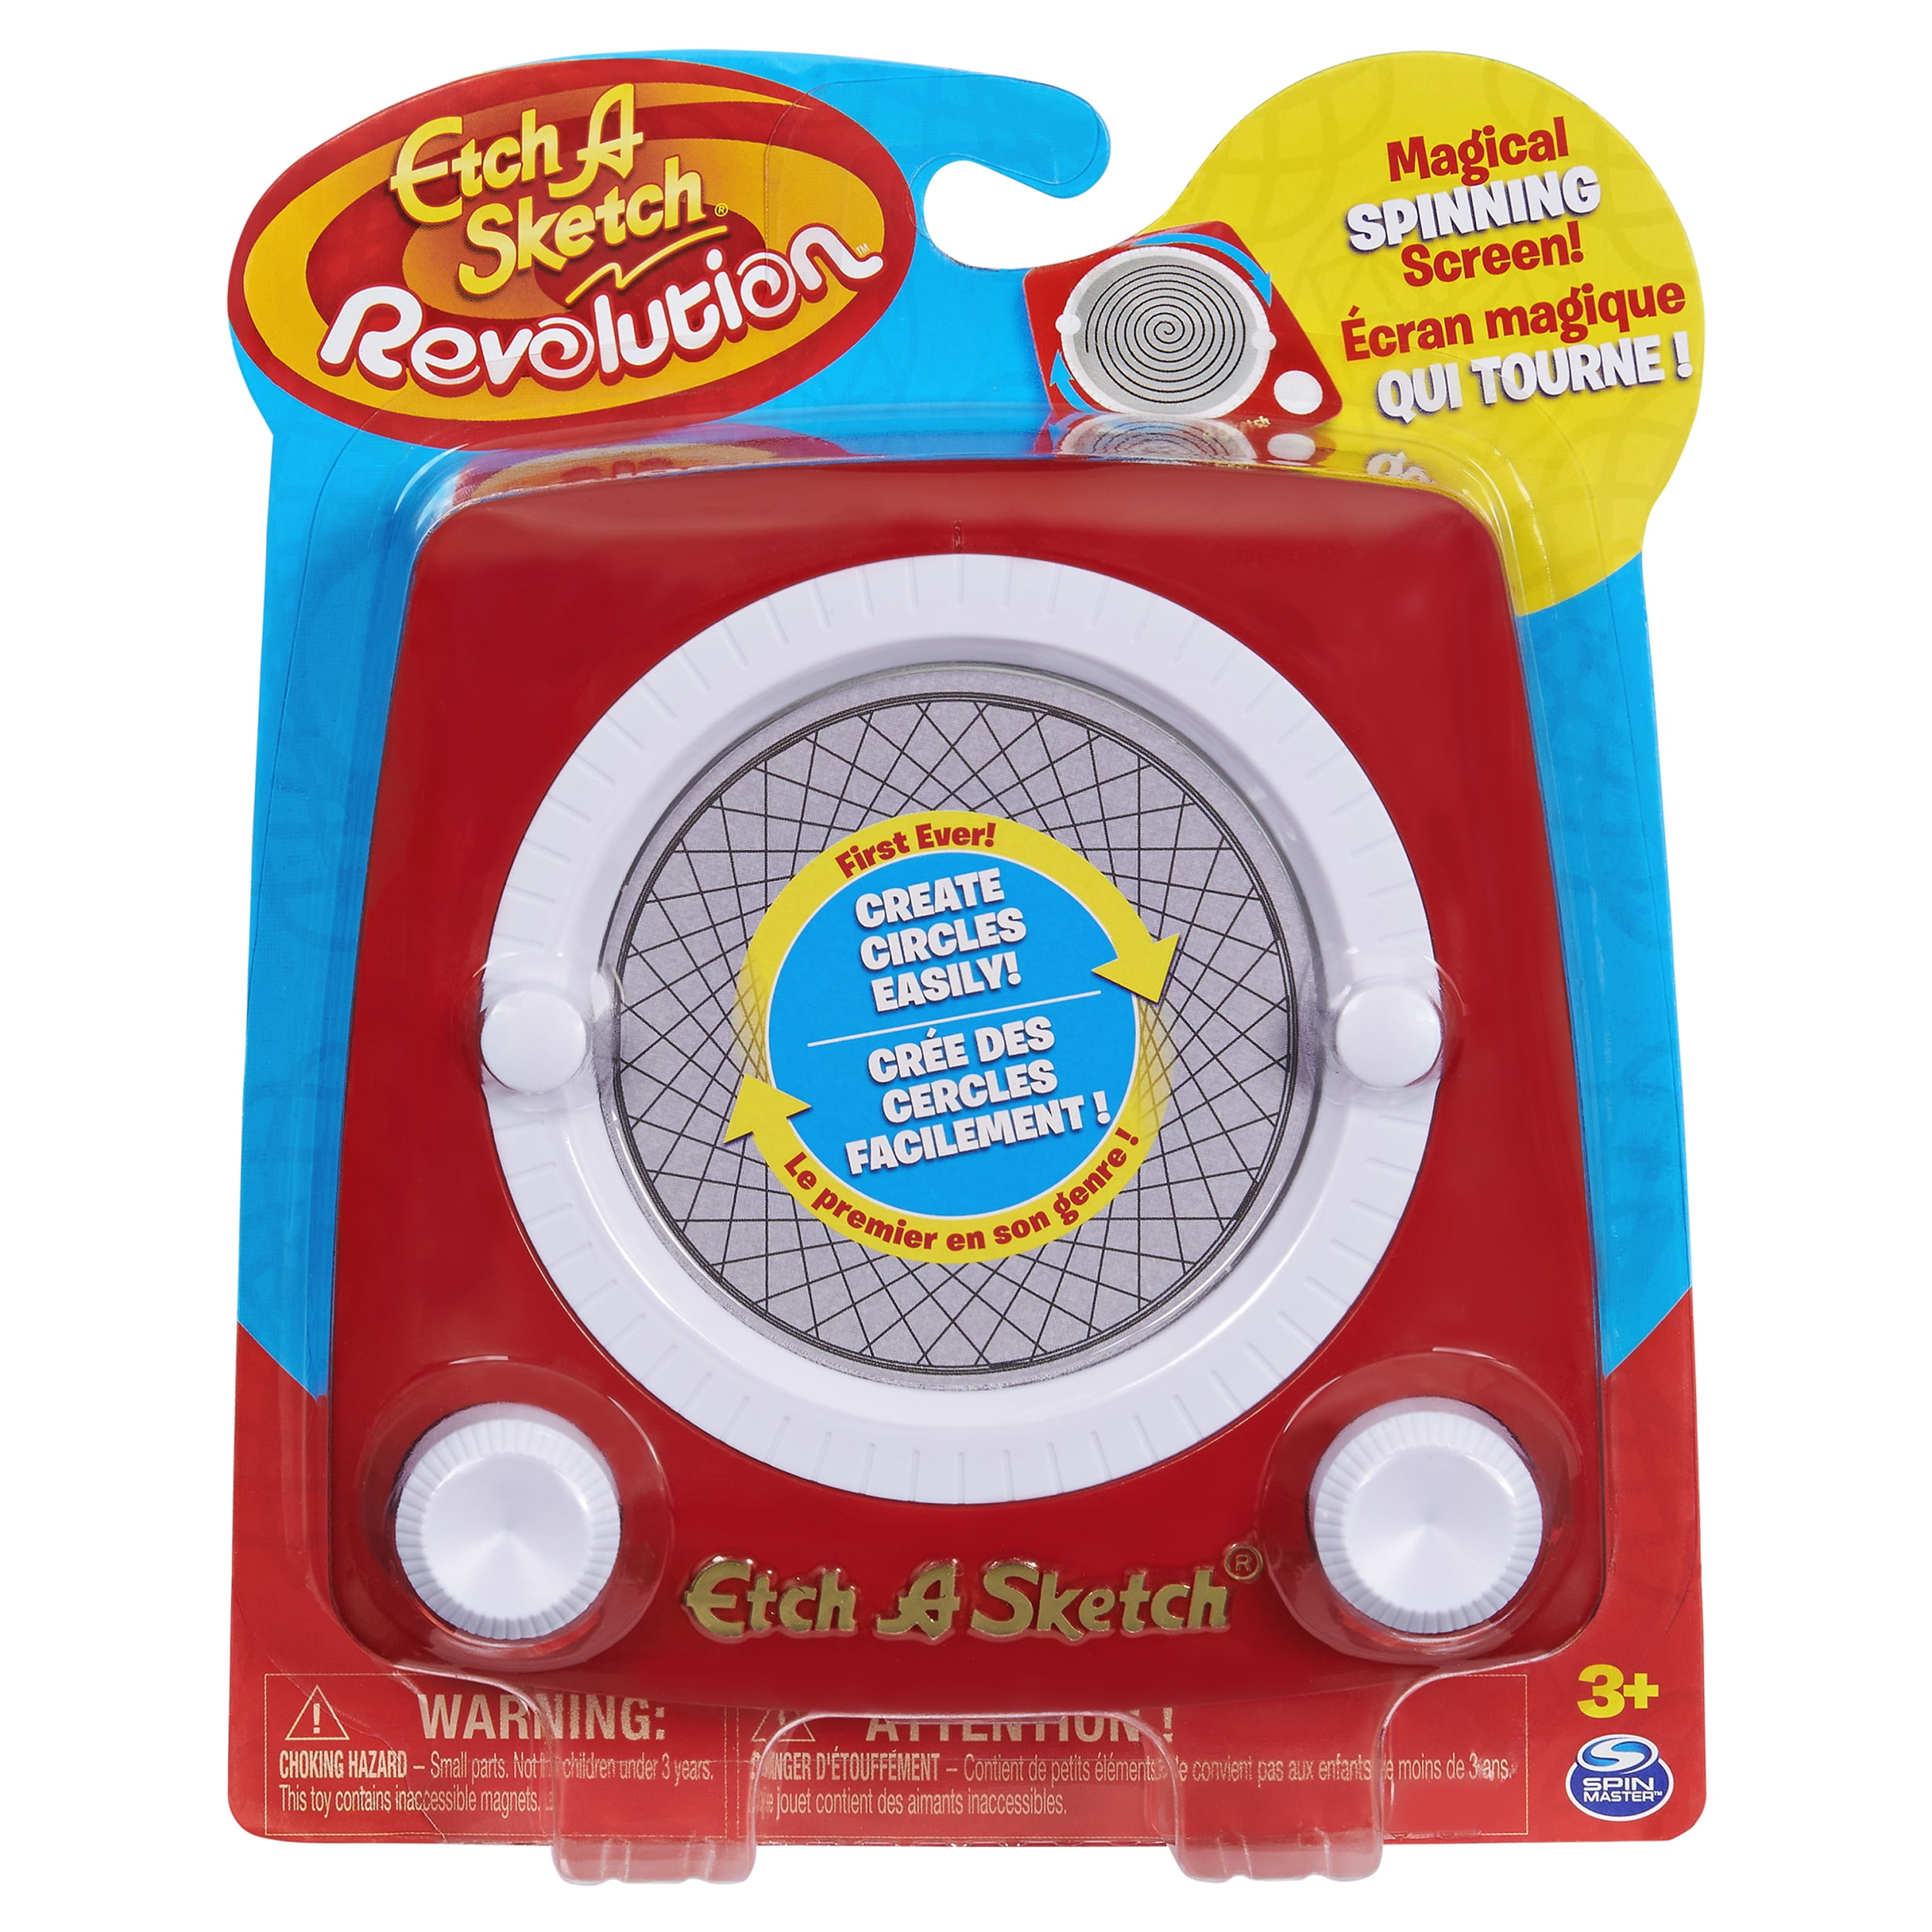 Etch A Sketch Pocket, Drawing Toy With Magic Screen, For Ages 3 And Up  (Style May Vary), Toys, Games & More